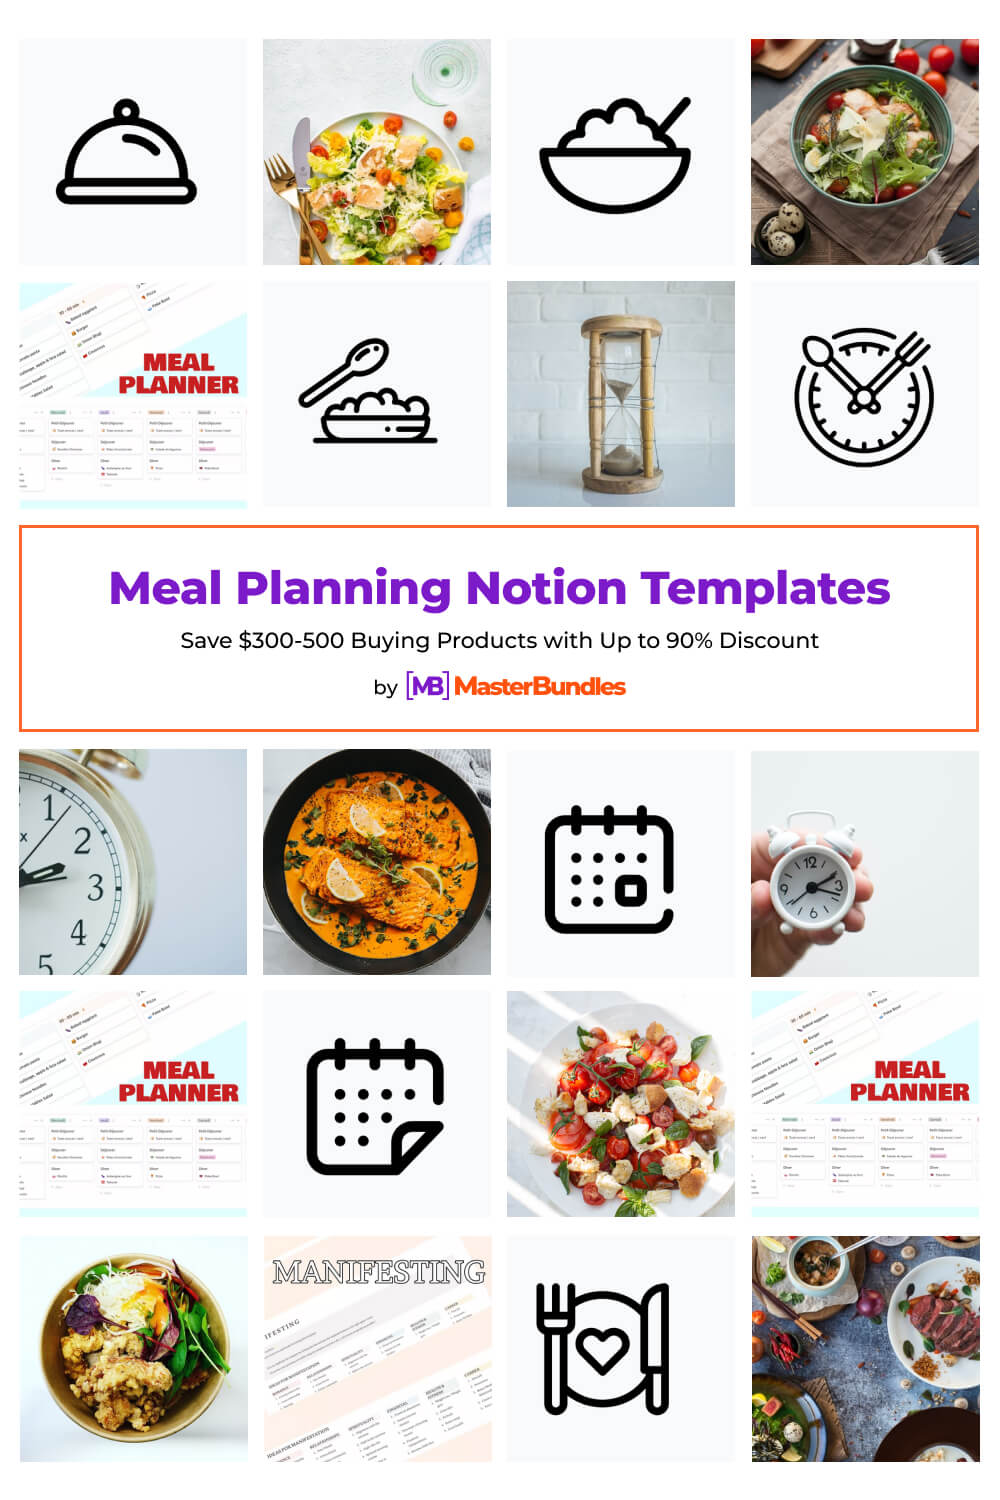 meal planning notion templates pinterest image.